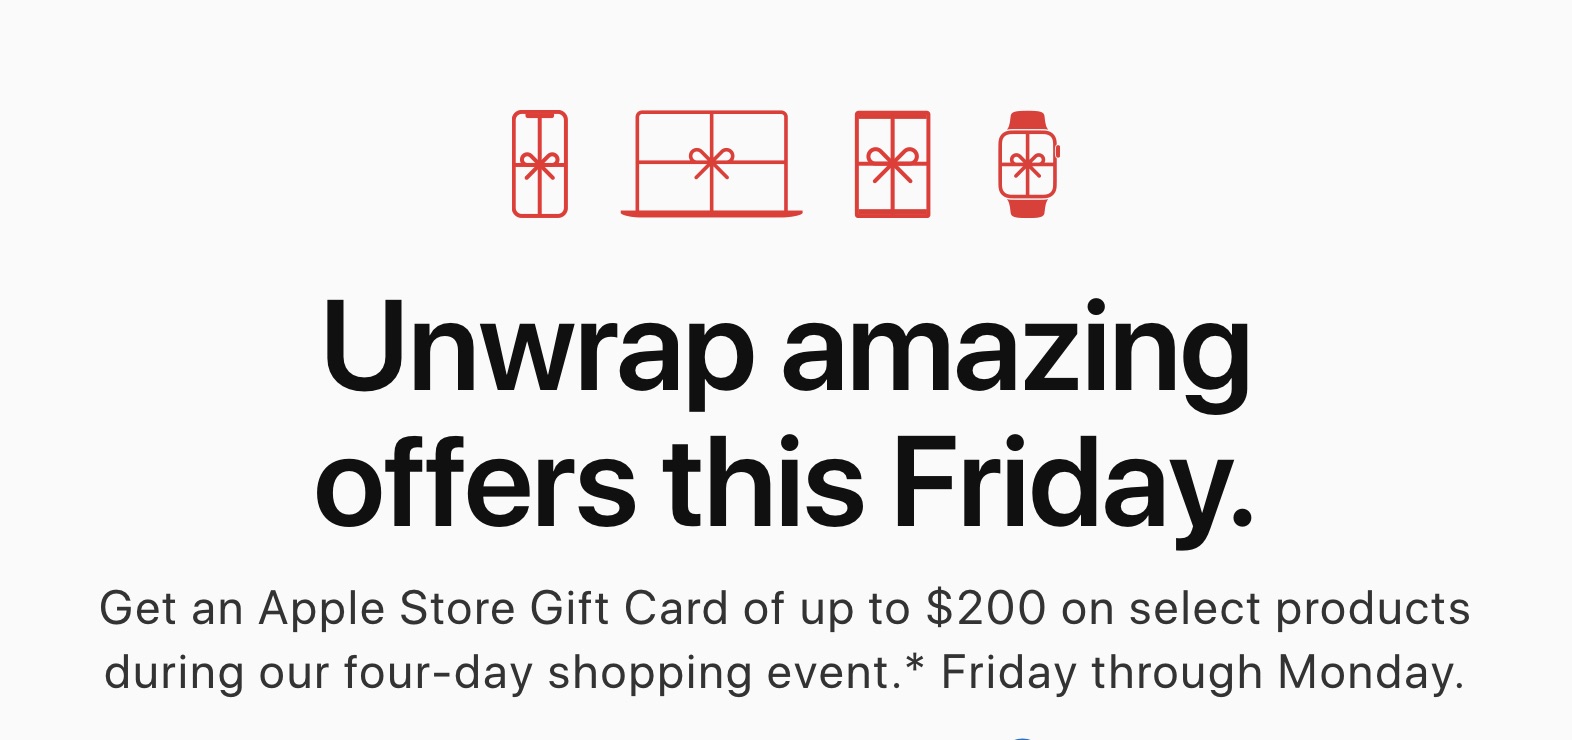 Apple Offering Up to $200 Gift Card With Select Products on Black